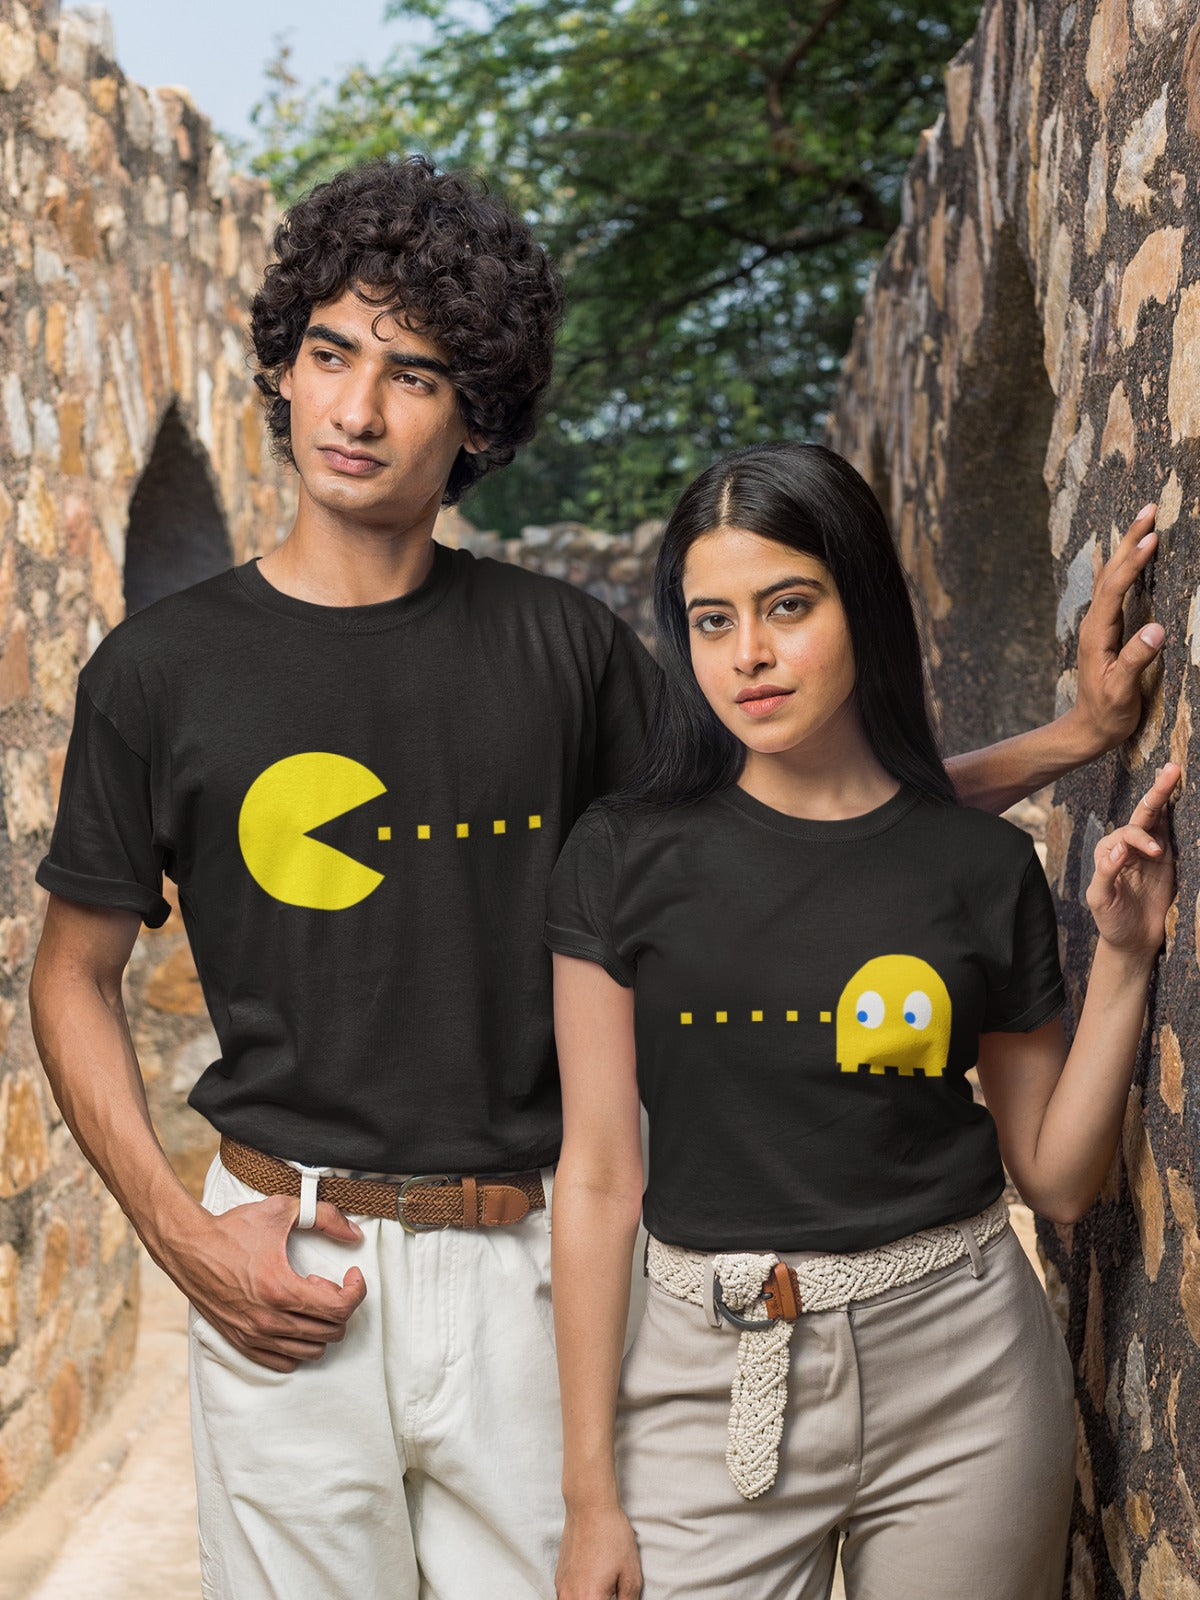 Get playful with your significant other with our black couple t-shirt set! One shirt features Pacman eating the trail, while the other has the ghost at the end of the trail. Made from high-quality materials, these t-shirts are comfortable and durable. Order now and show off your love in a fun way!